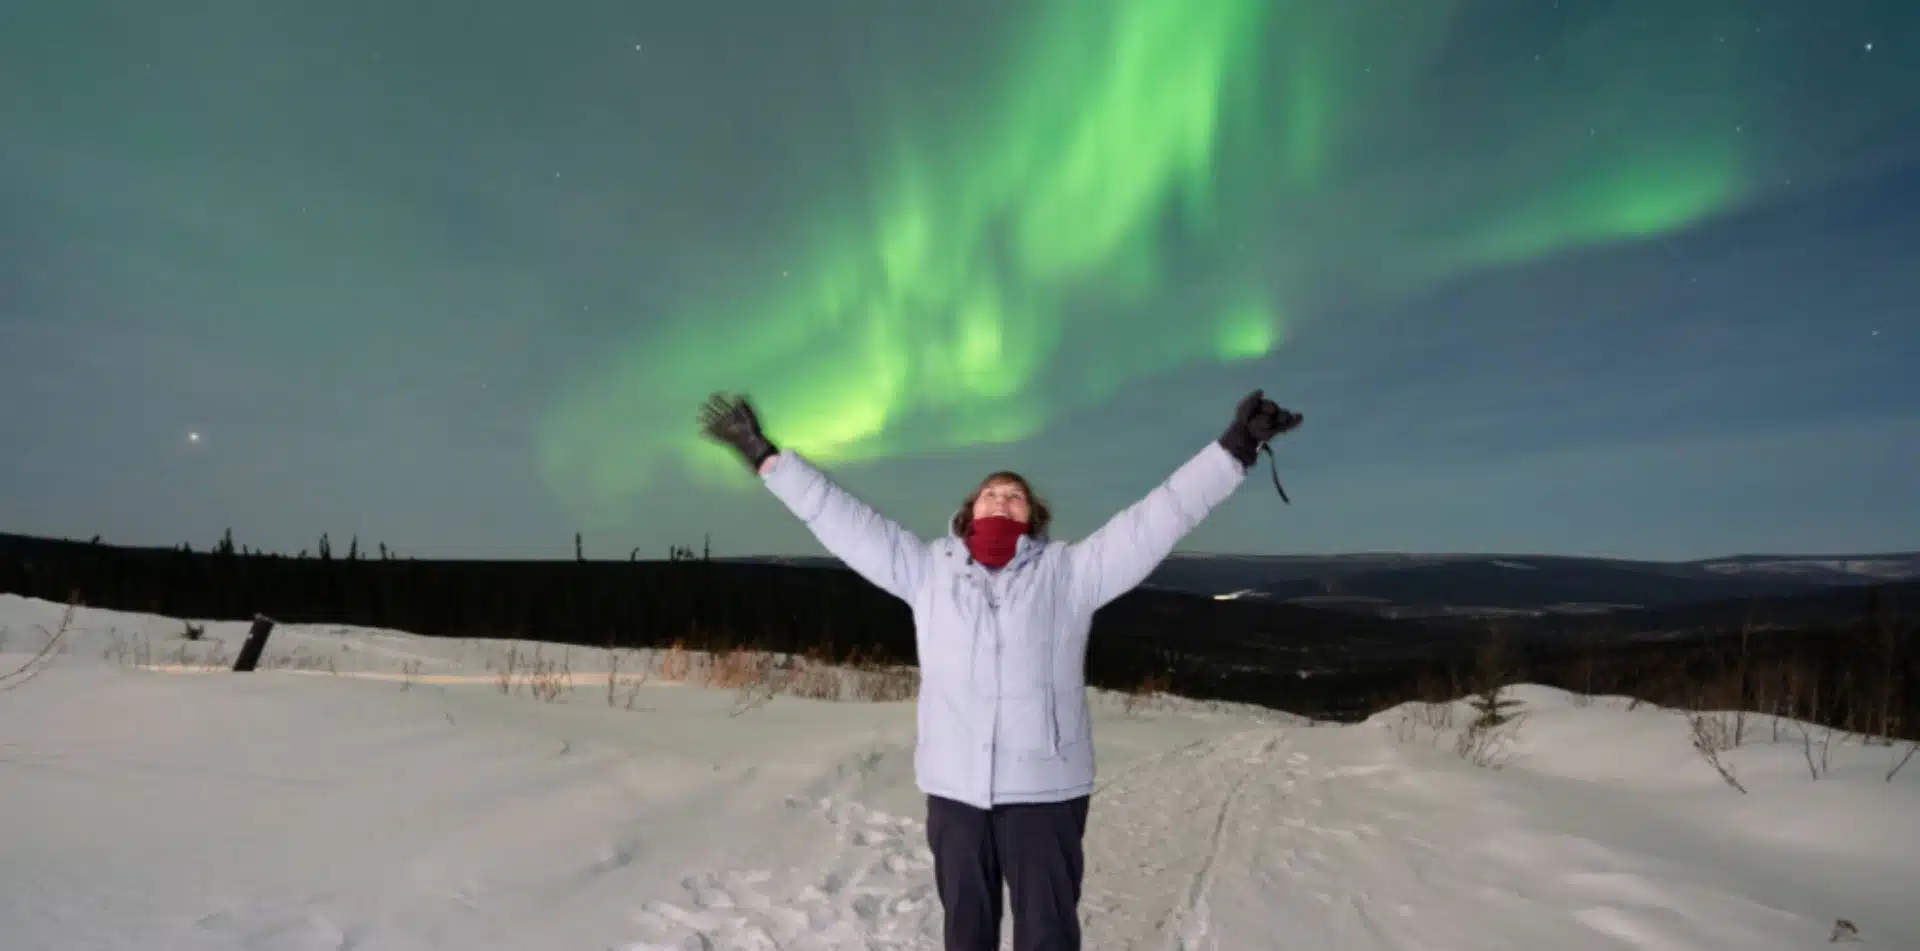 Marvel at the Northern Lights